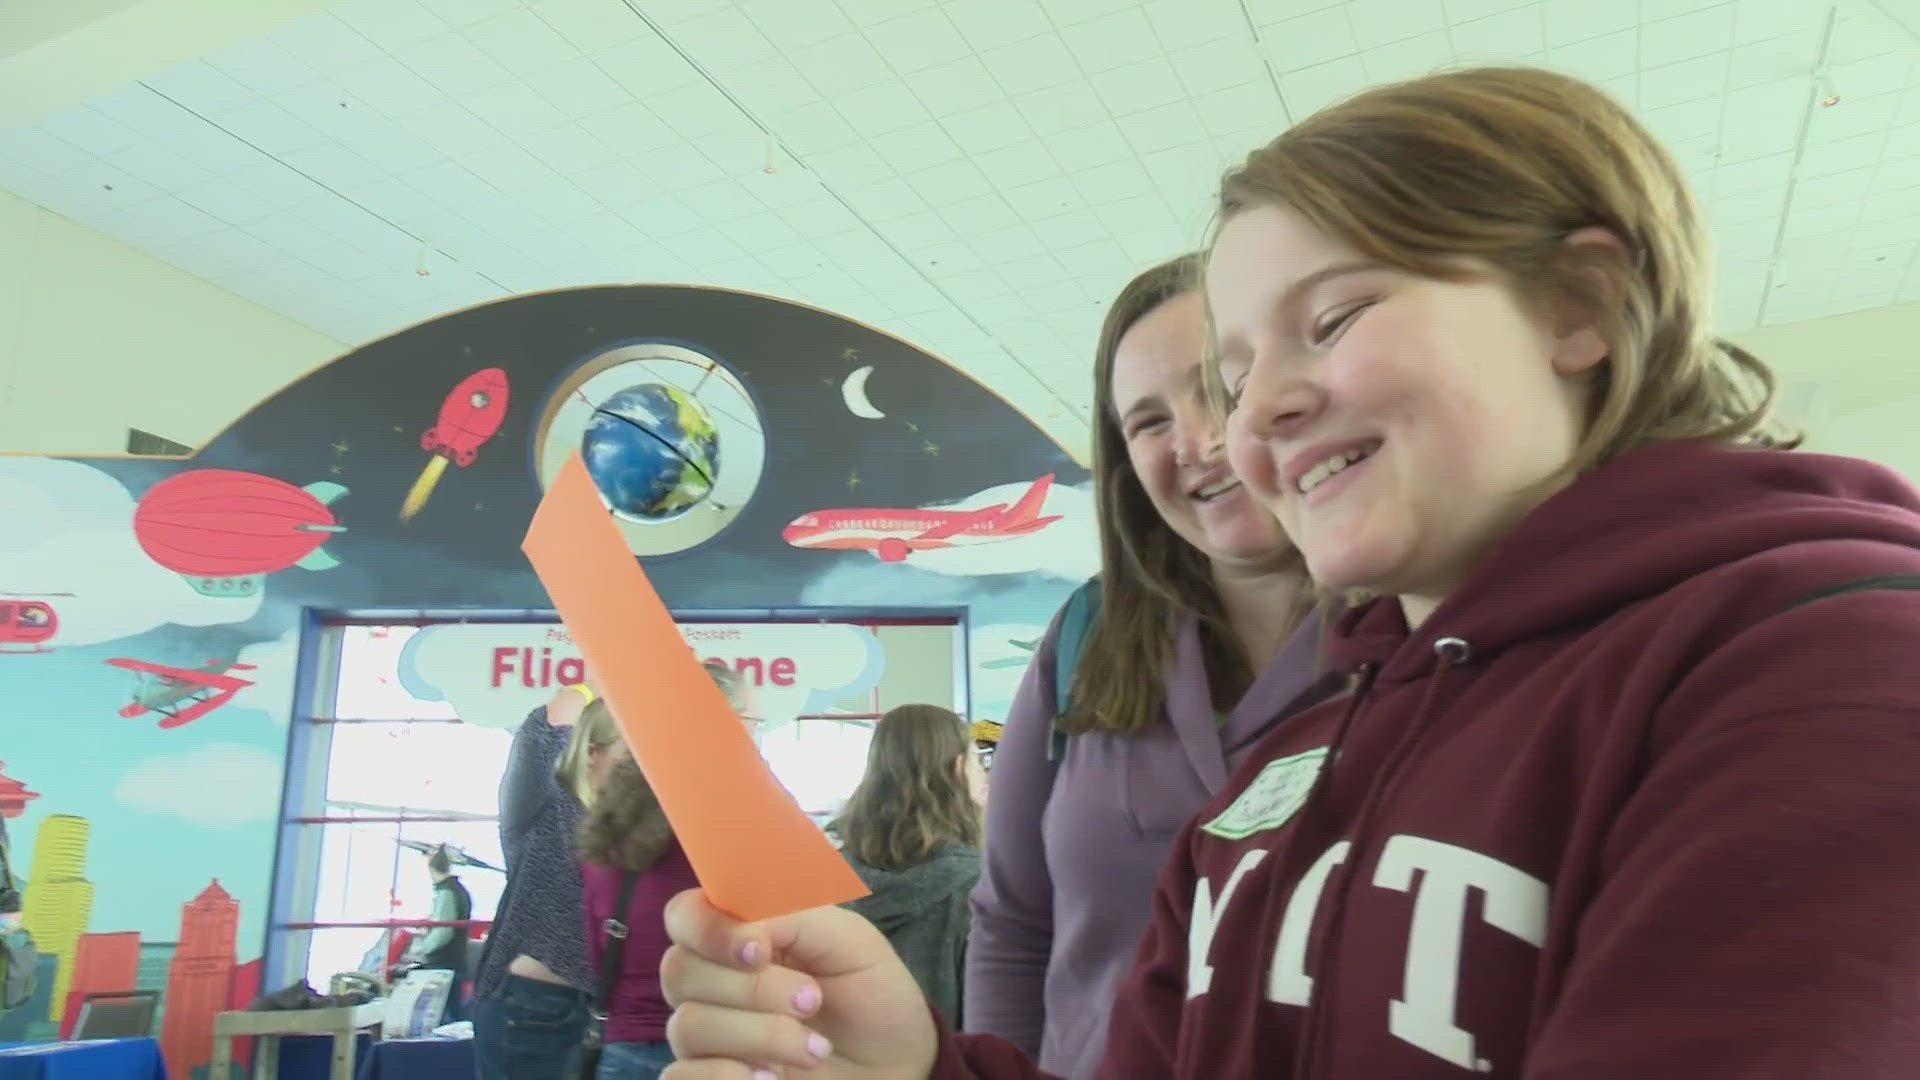 Museum of Flight officials said the goal of the one-day event is to inspire girls and young women to consider careers within the aviation and aerospace fields.